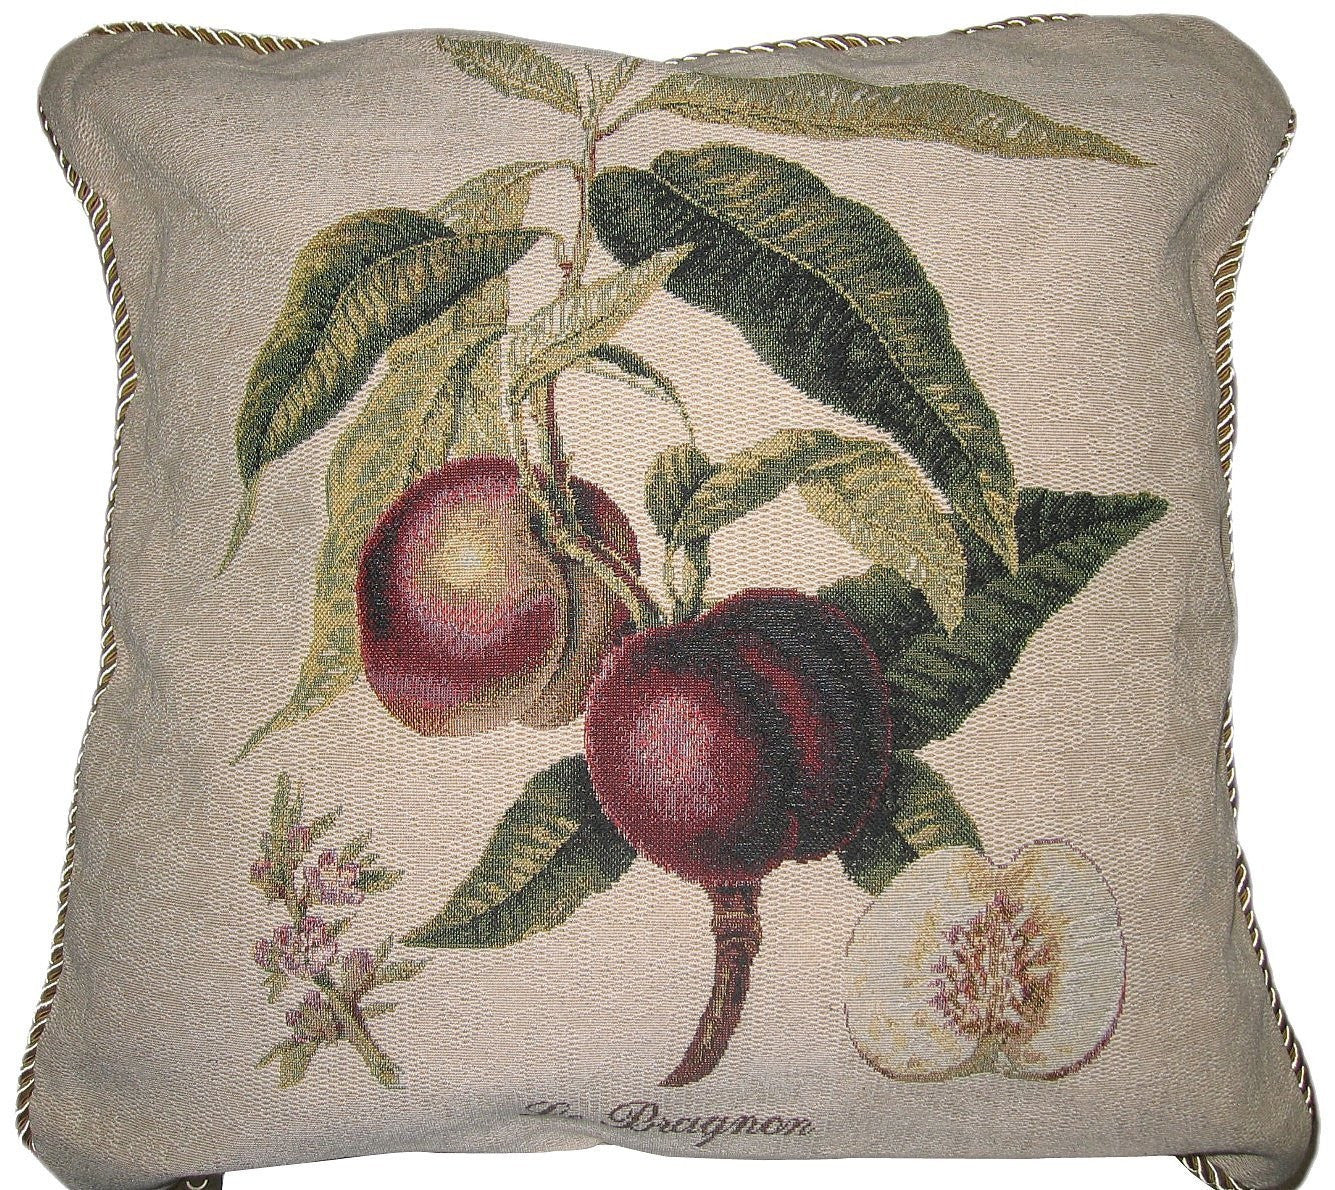 Nectarine Fruits Elegant Novelty Woven Square Accent Cushion Cover Throw Toss Pillow Case - 18" - 1-Piece - Stores Basement - Discount Bedding